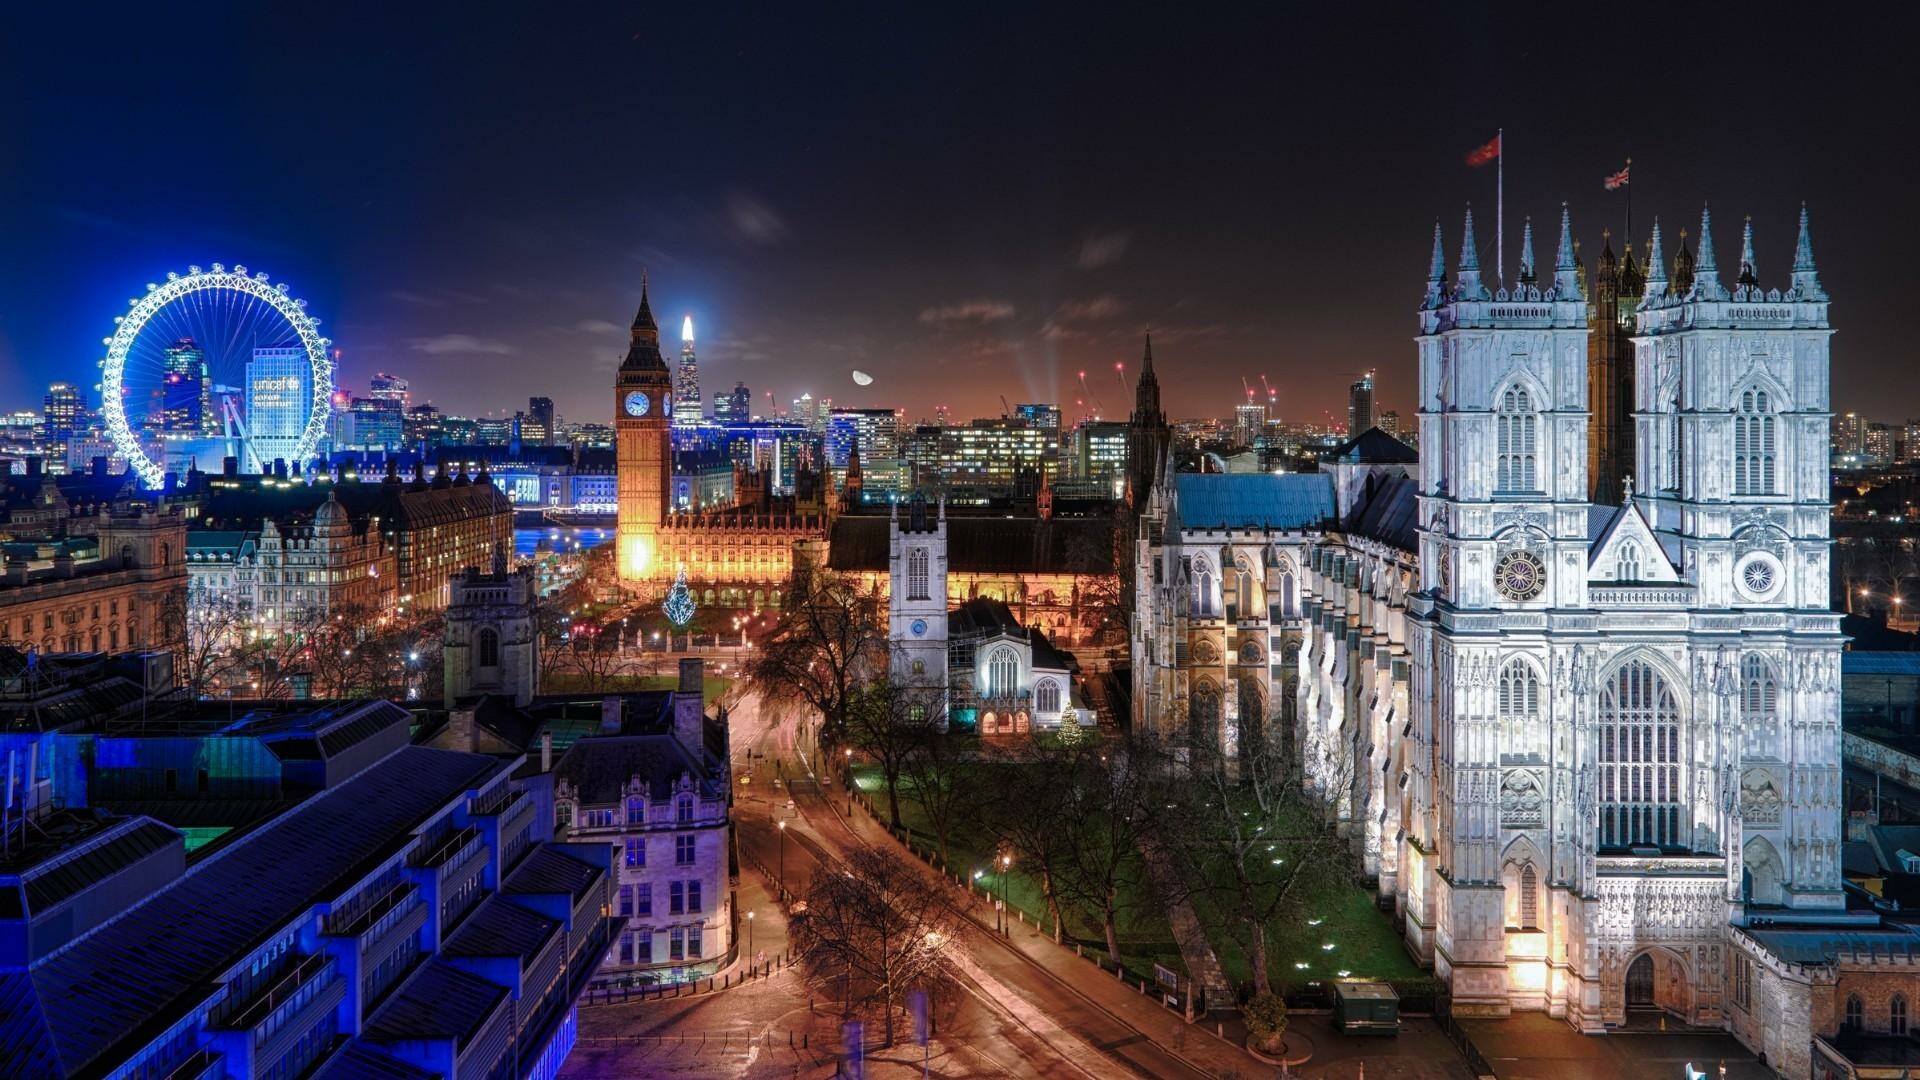 49+ London Wallpapers: HD, 4K, 5K for PC and Mobile | Download free images  for iPhone, Android